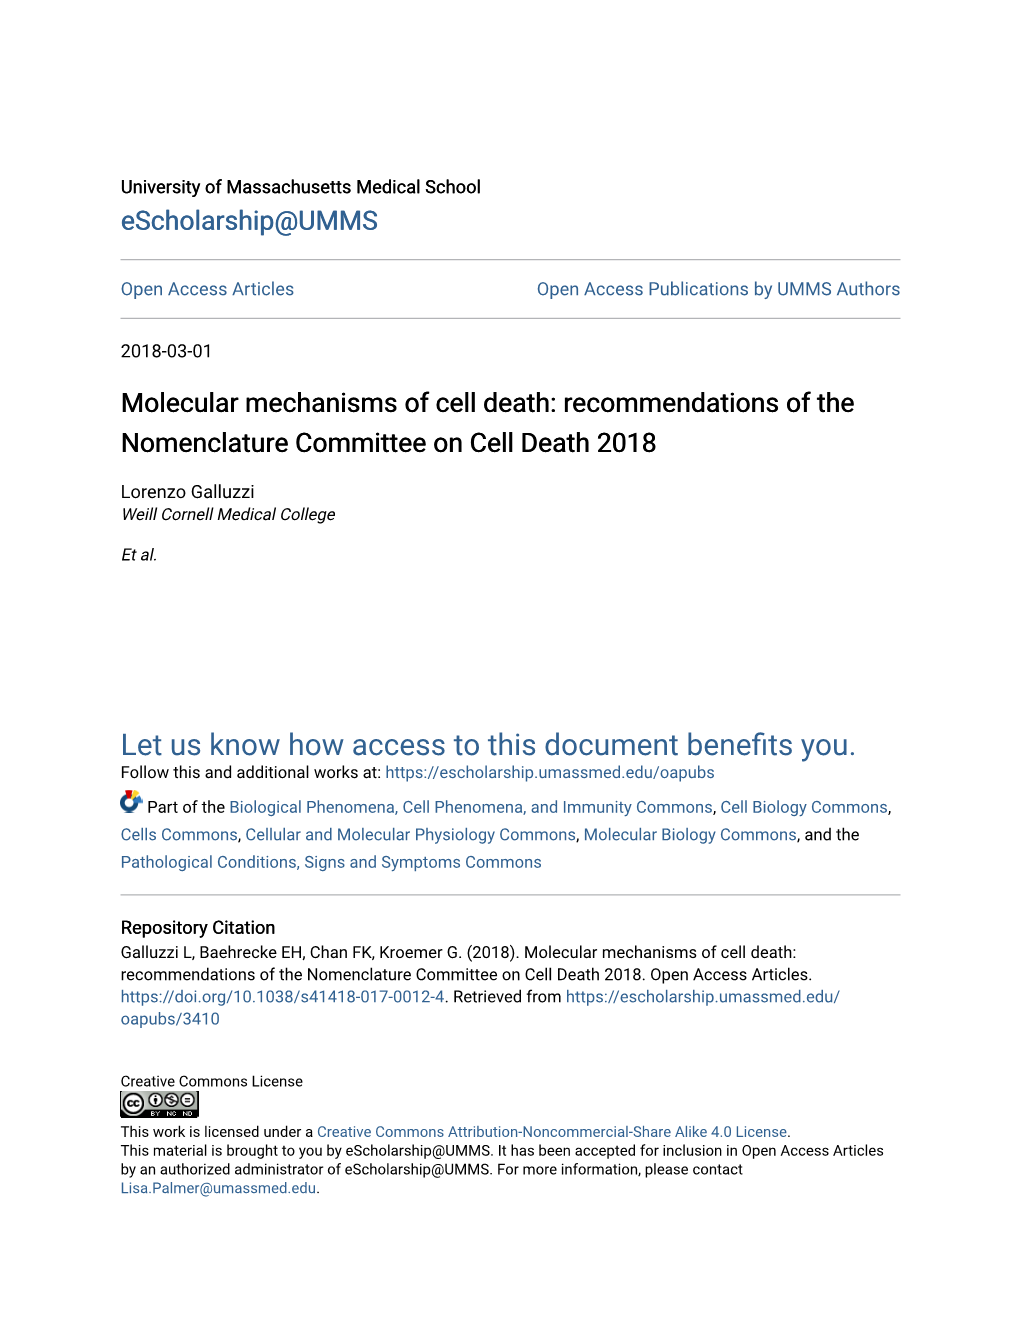 Molecular Mechanisms of Cell Death: Recommendations of the Nomenclature Committee on Cell Death 2018